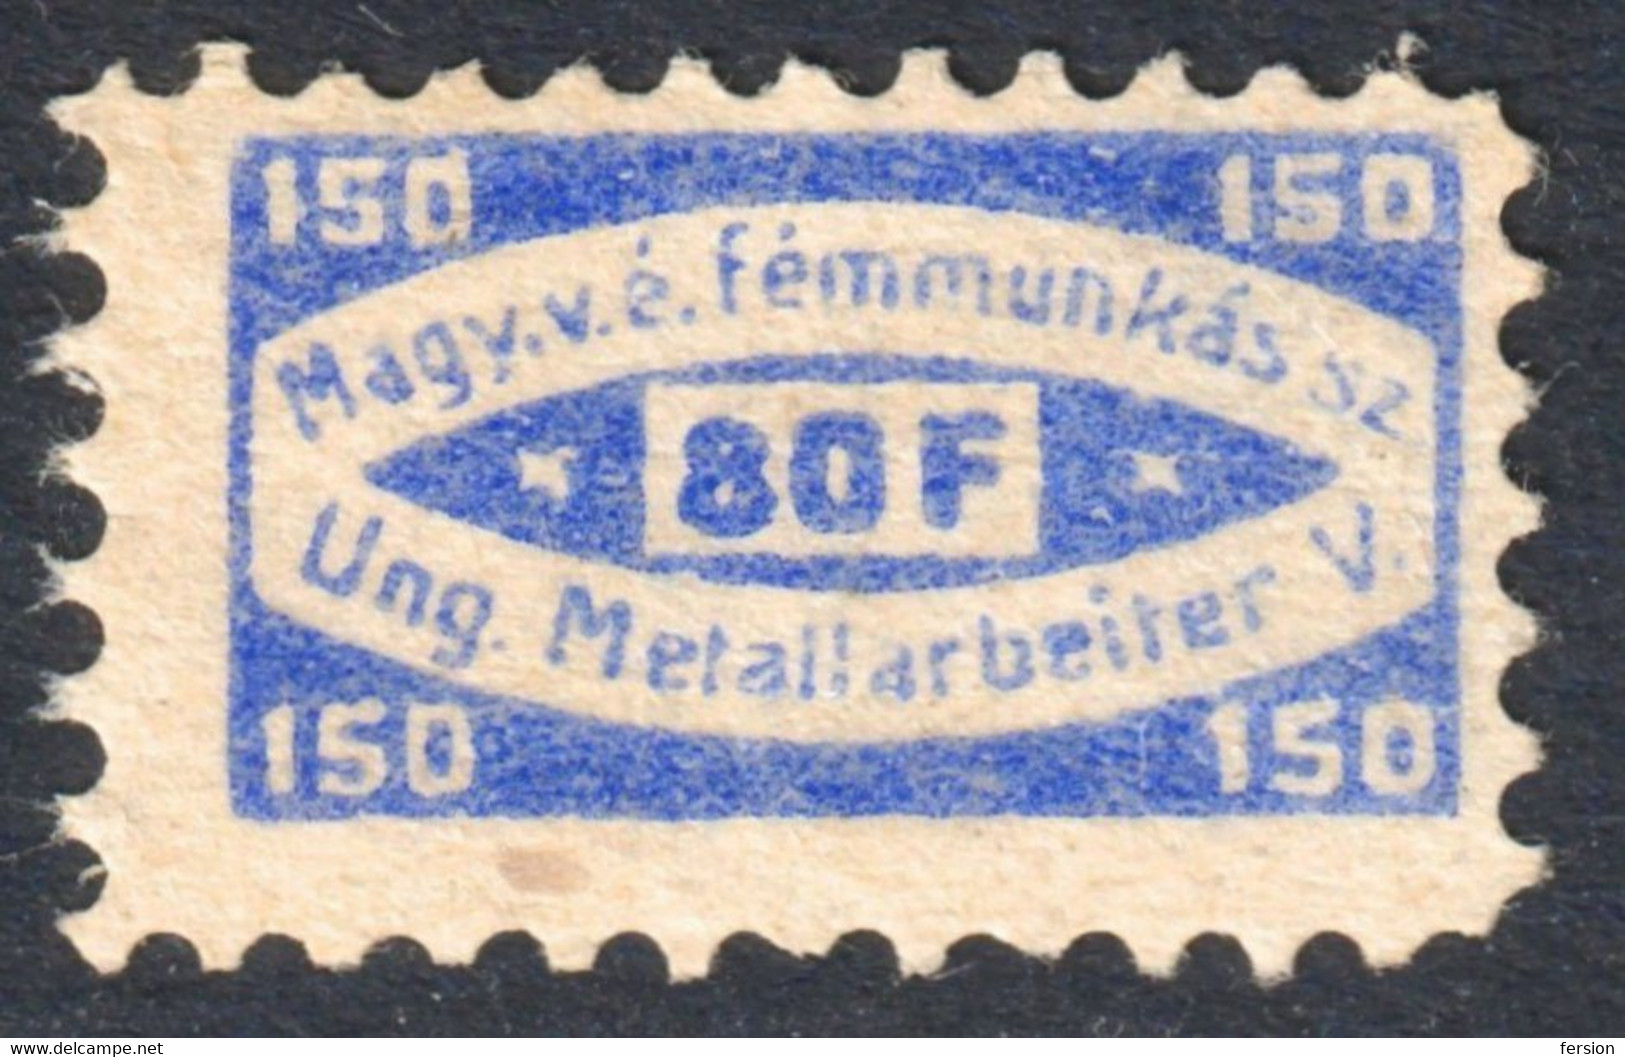 METAL INDUSTRY Factory Worker Trade Labour Union Hungary 1910's Charity Tax LABEL VIGNETTE CINDERELLA Germany - Service